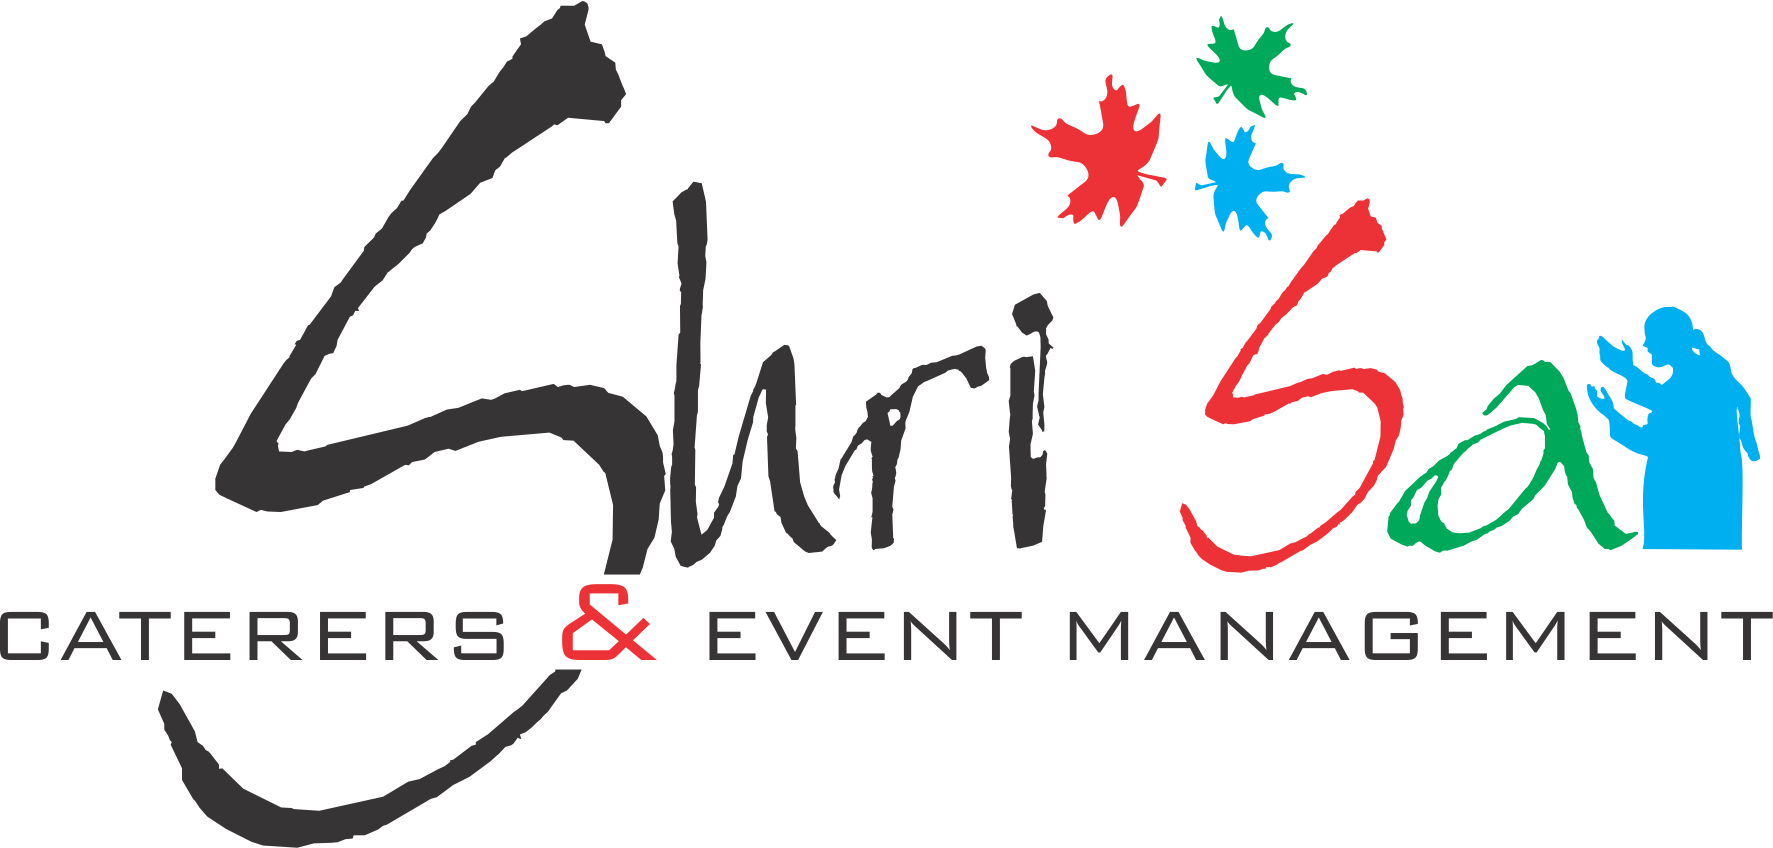 Shri Sai Caterers|Catering Services|Event Services